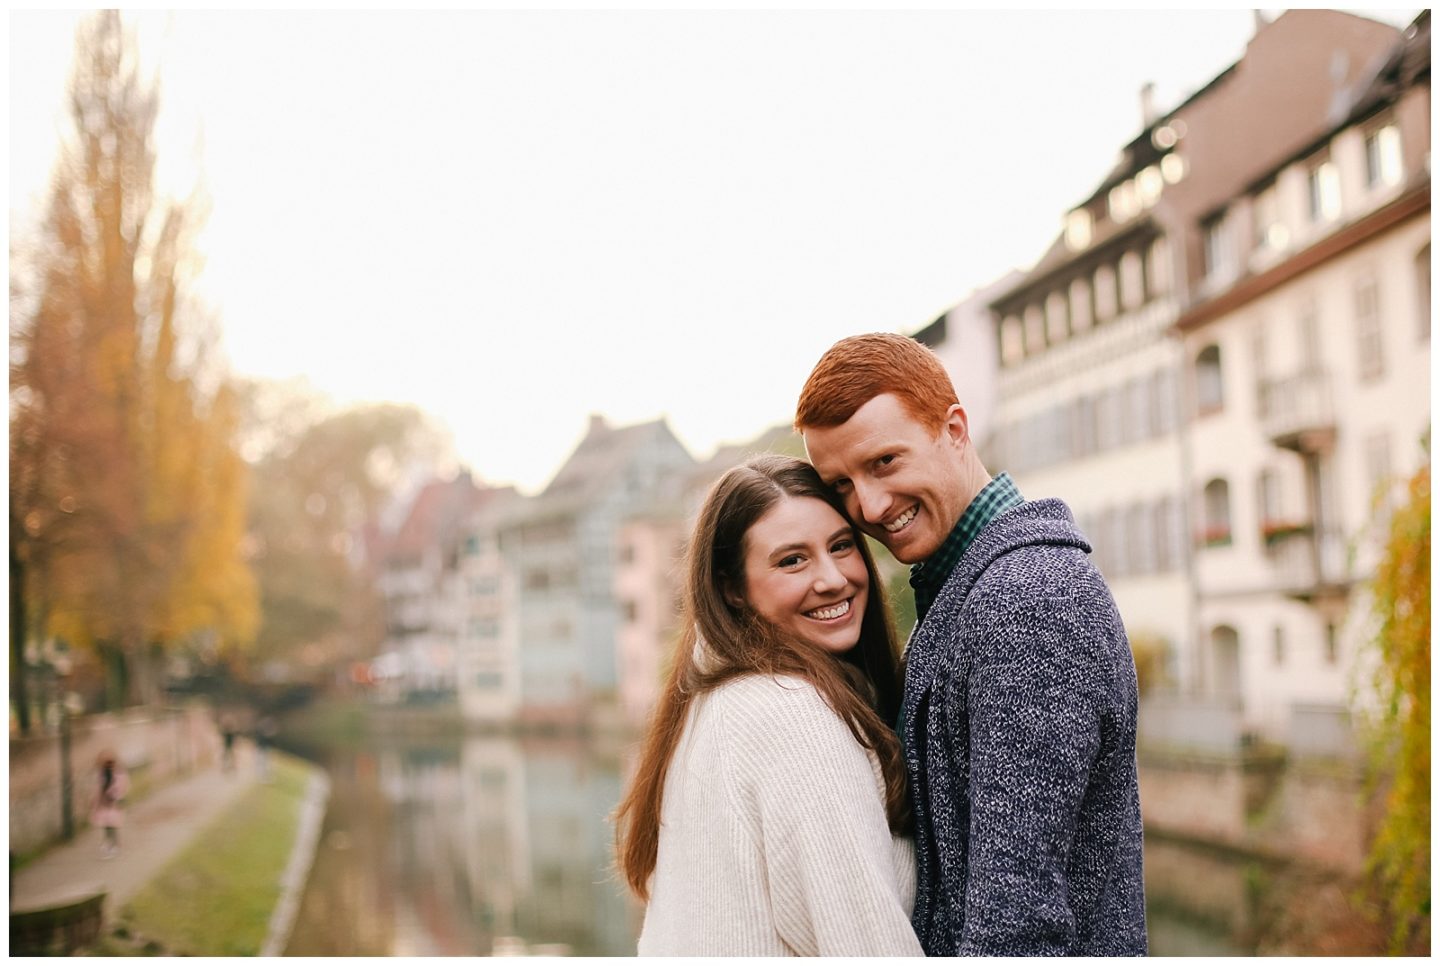 couple smiling in Strasbourg Petite France for engagement photoshoot